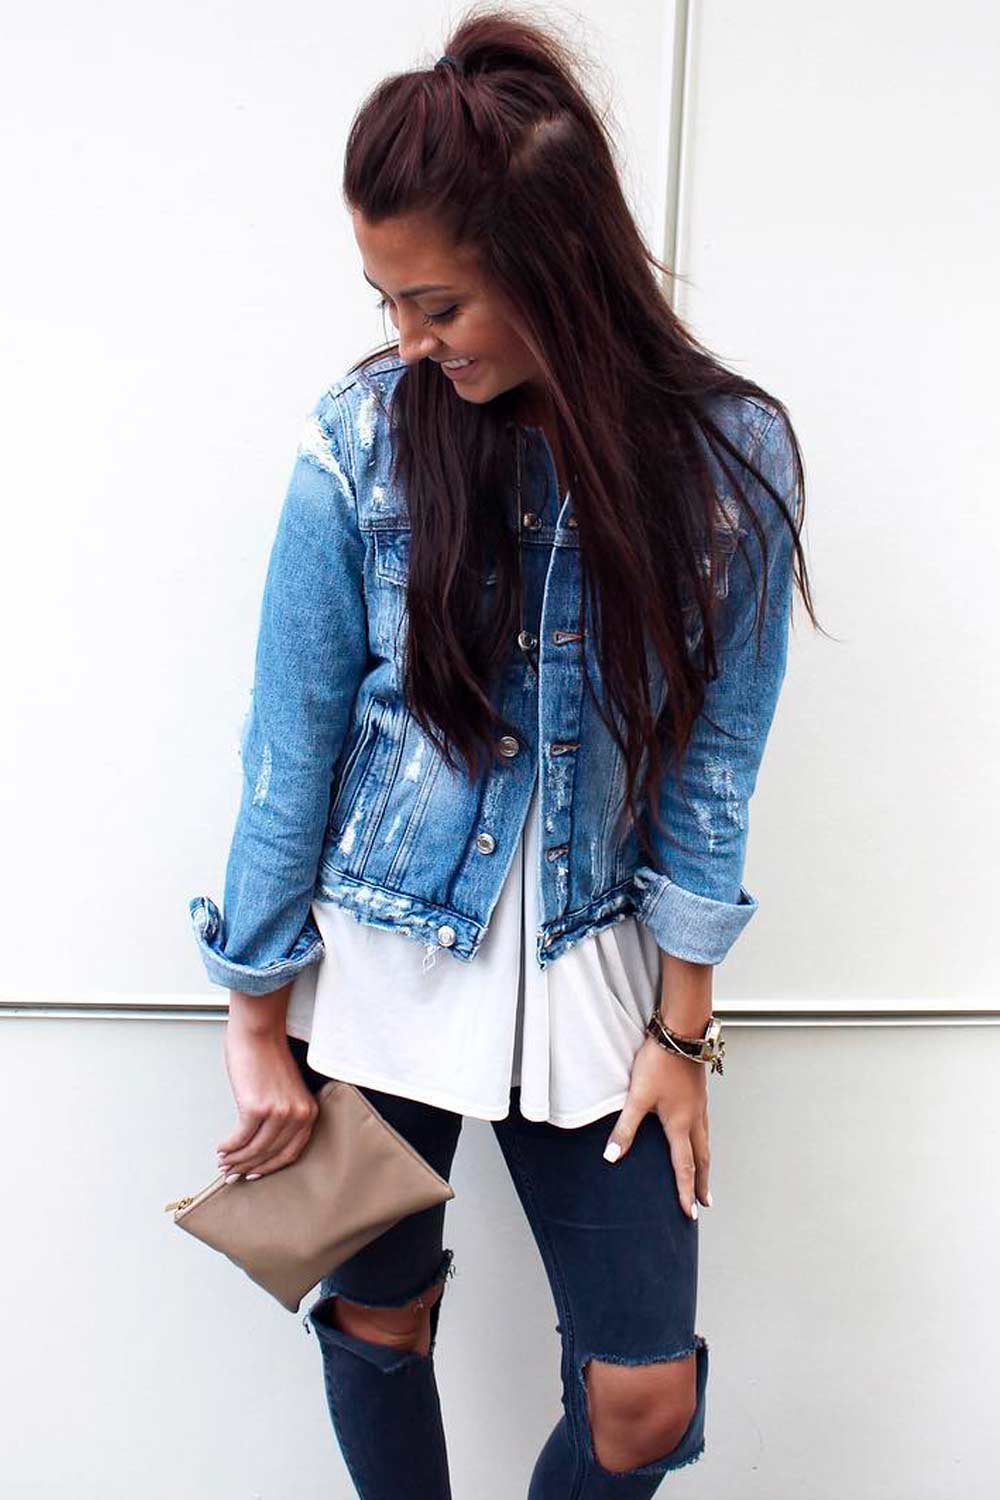 What to Match With Your Denim Jacket